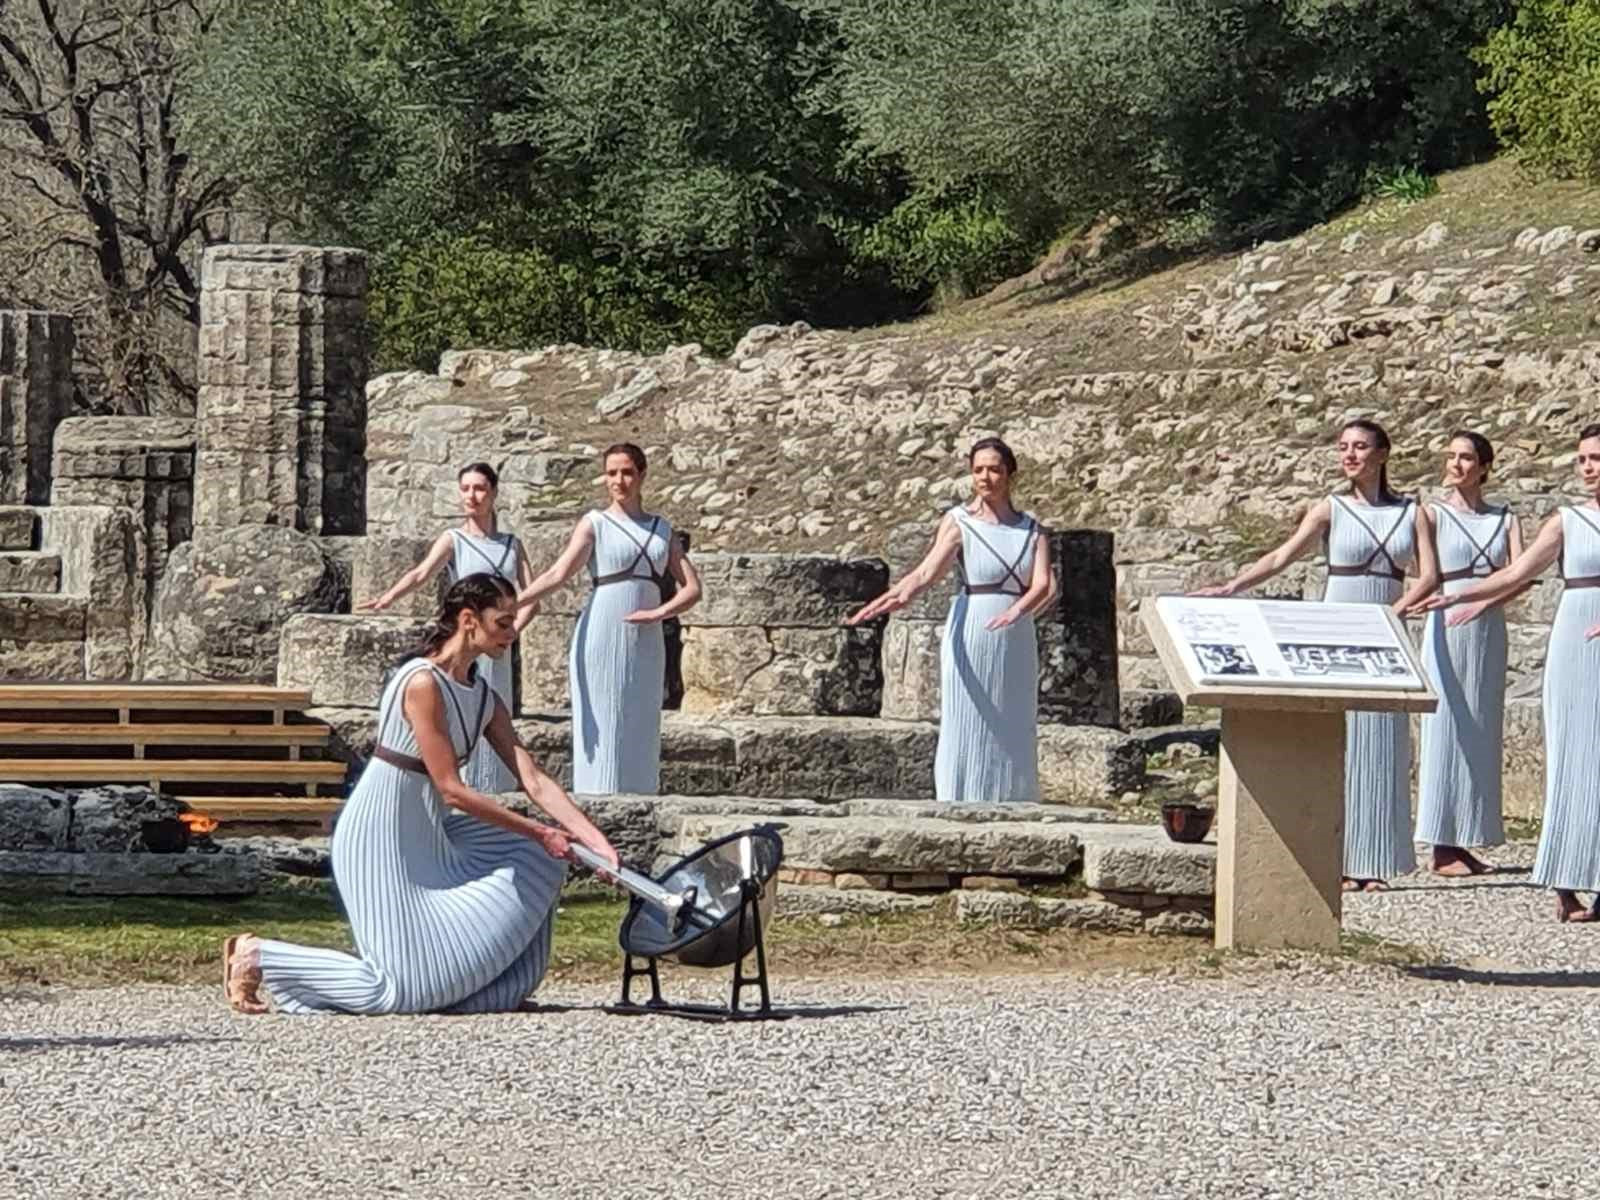 High Priestess Xanthi Georgiou lights the Olympic Flame during a dress rehearsal in Olympia today ©Hellenic Olympic Committee